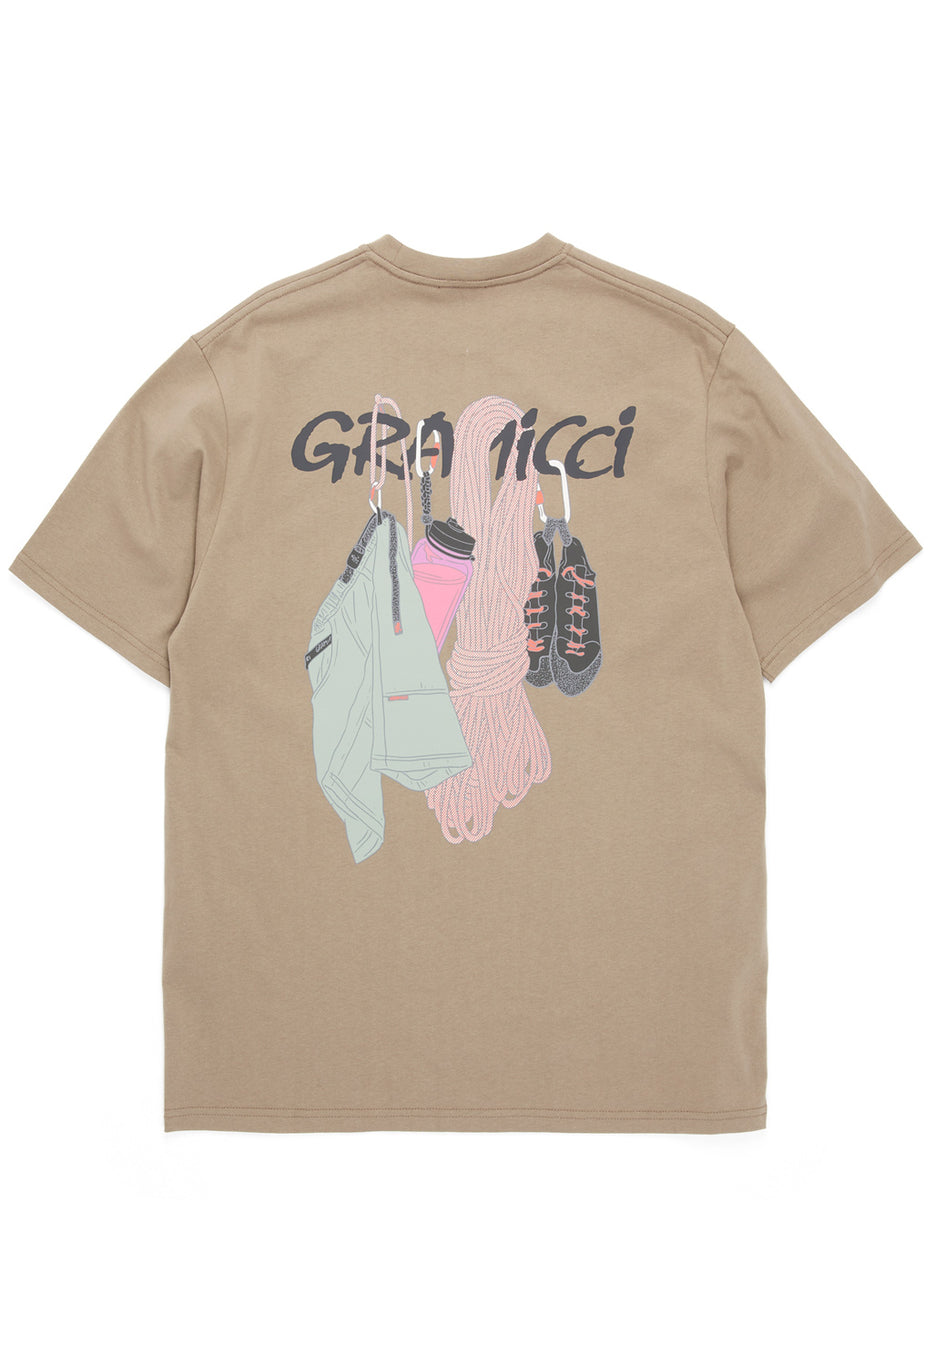 Gramicci Equipped Tee - Coyote